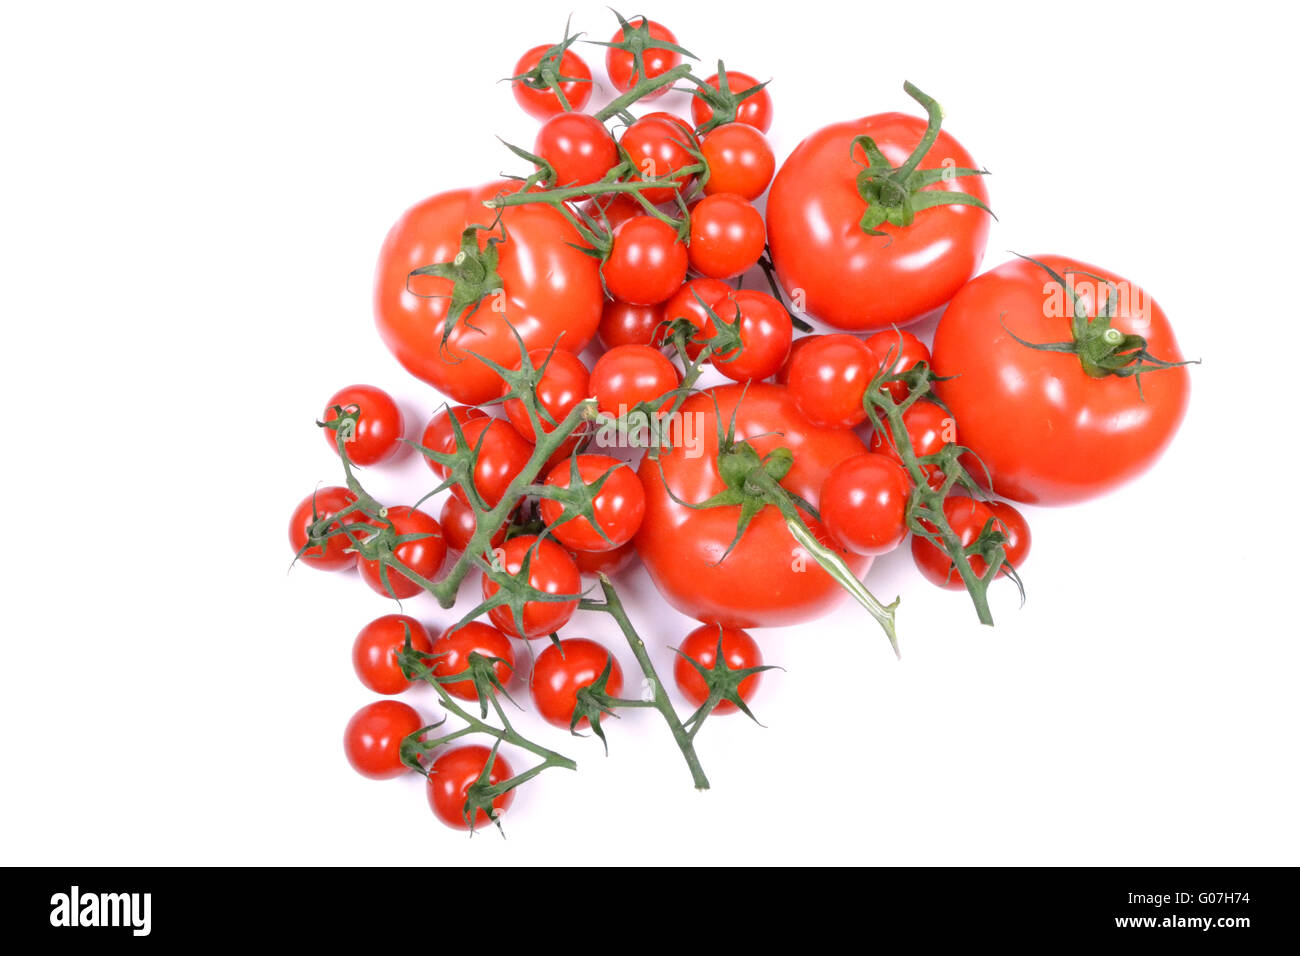 Several red, ripe tomatoes. Stock Photo